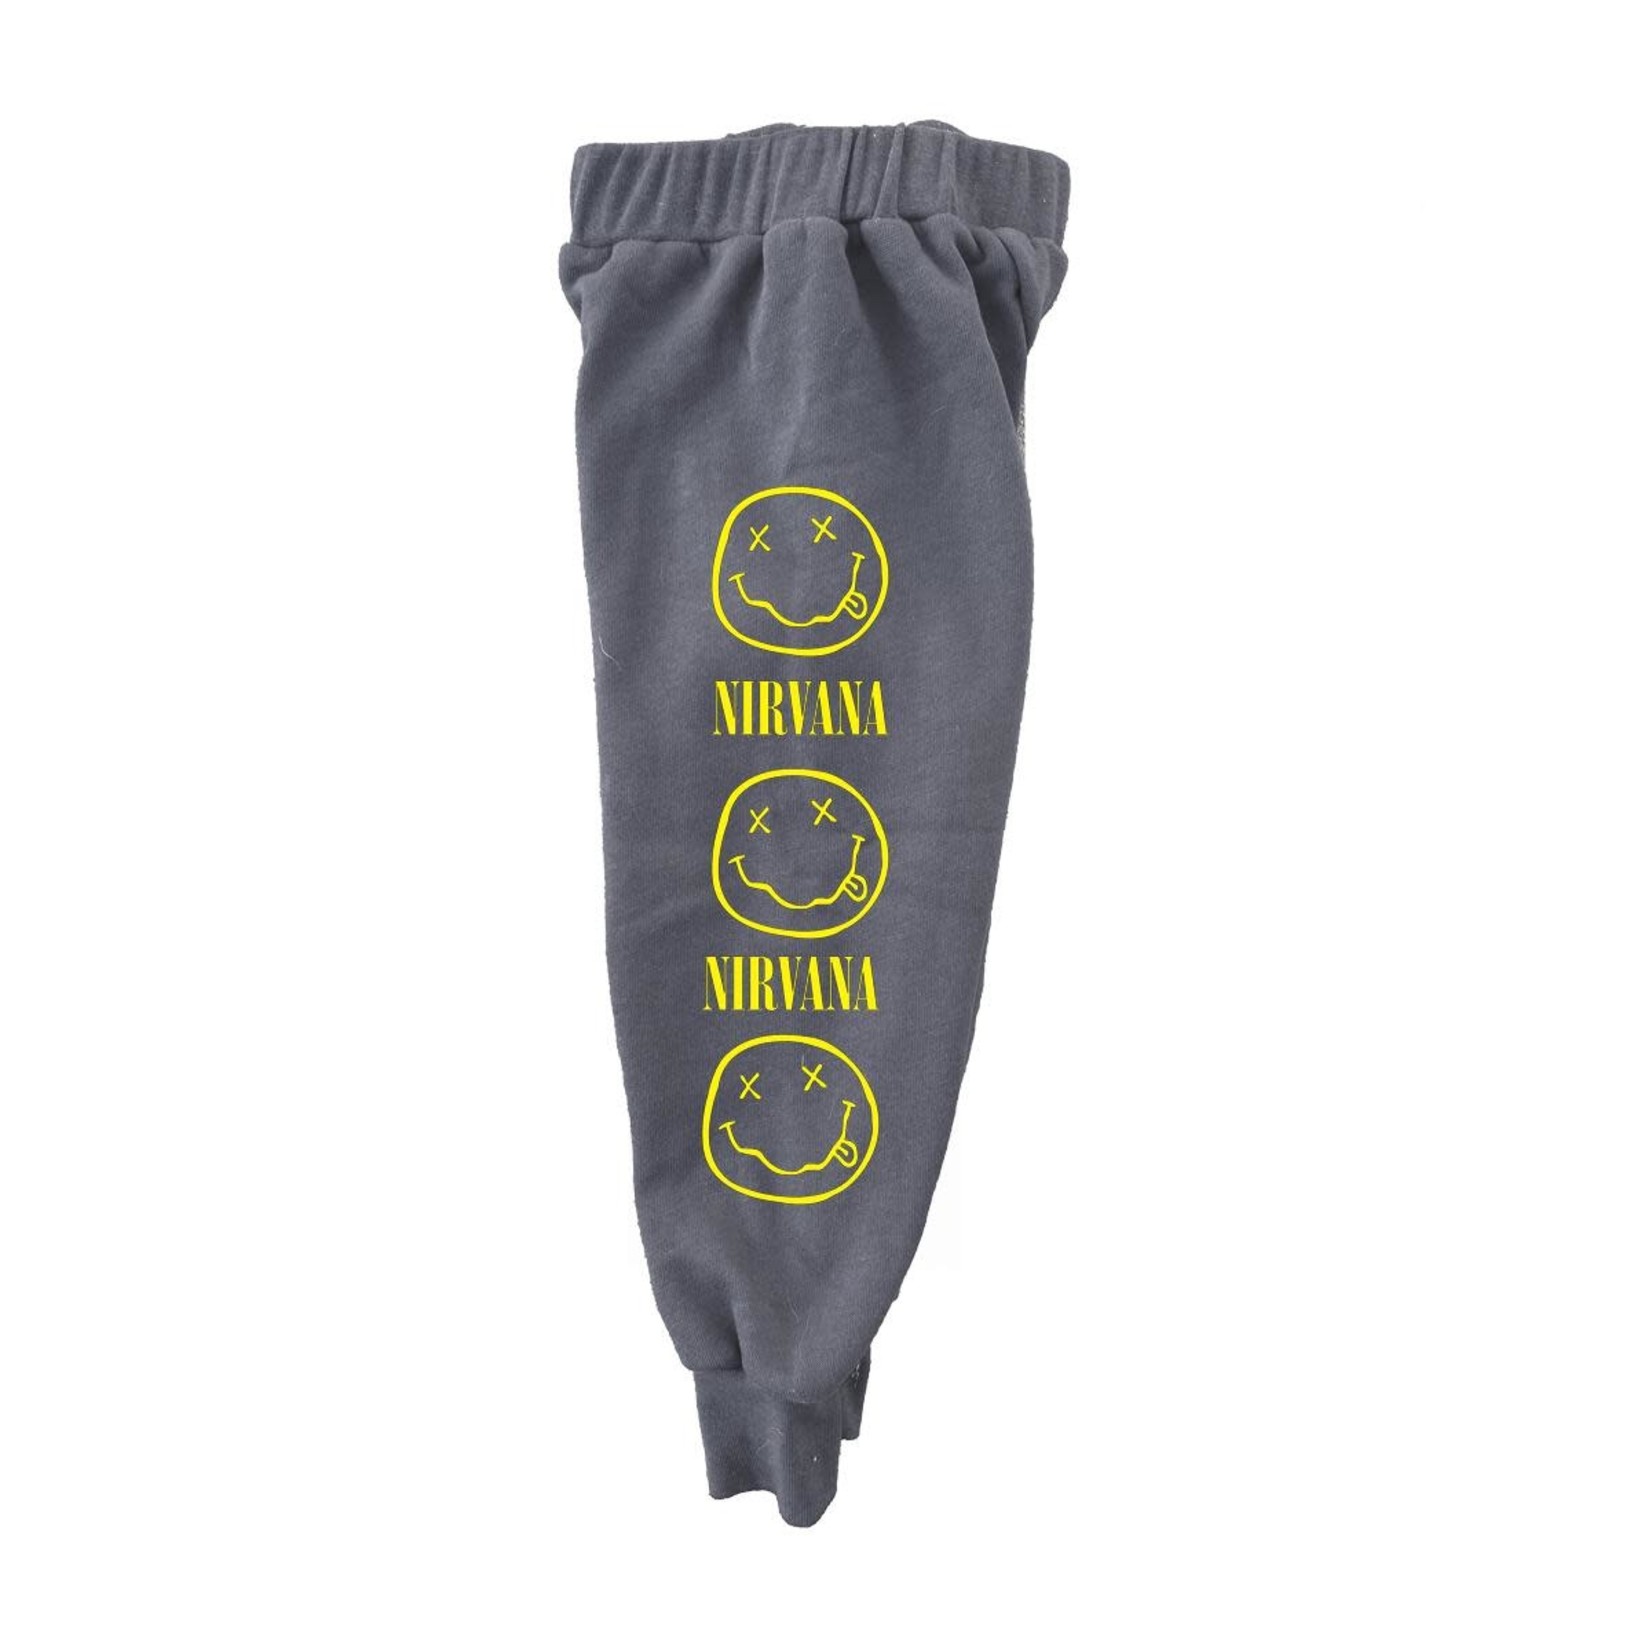 Rowdy Spout Rowdy Sprout Off Black Nirvana Sweatpant